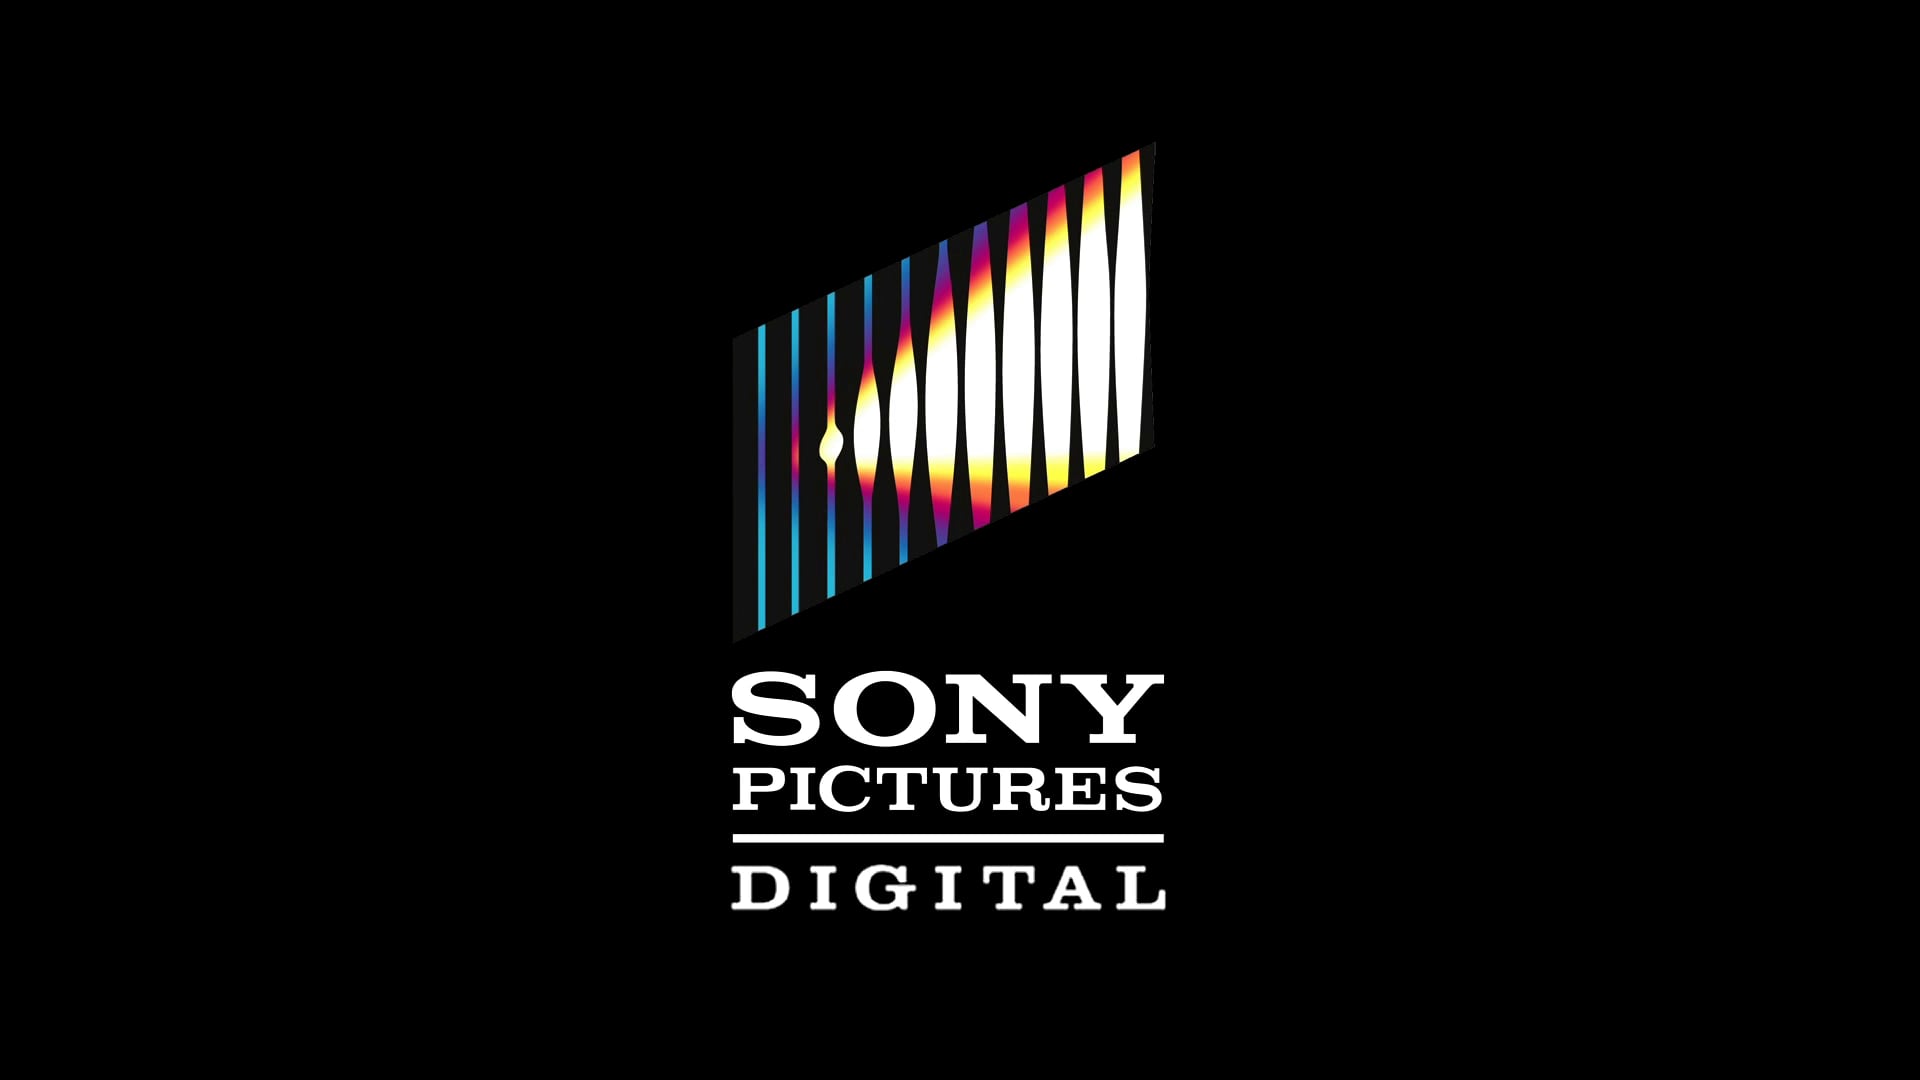 Sony Pictures Digital